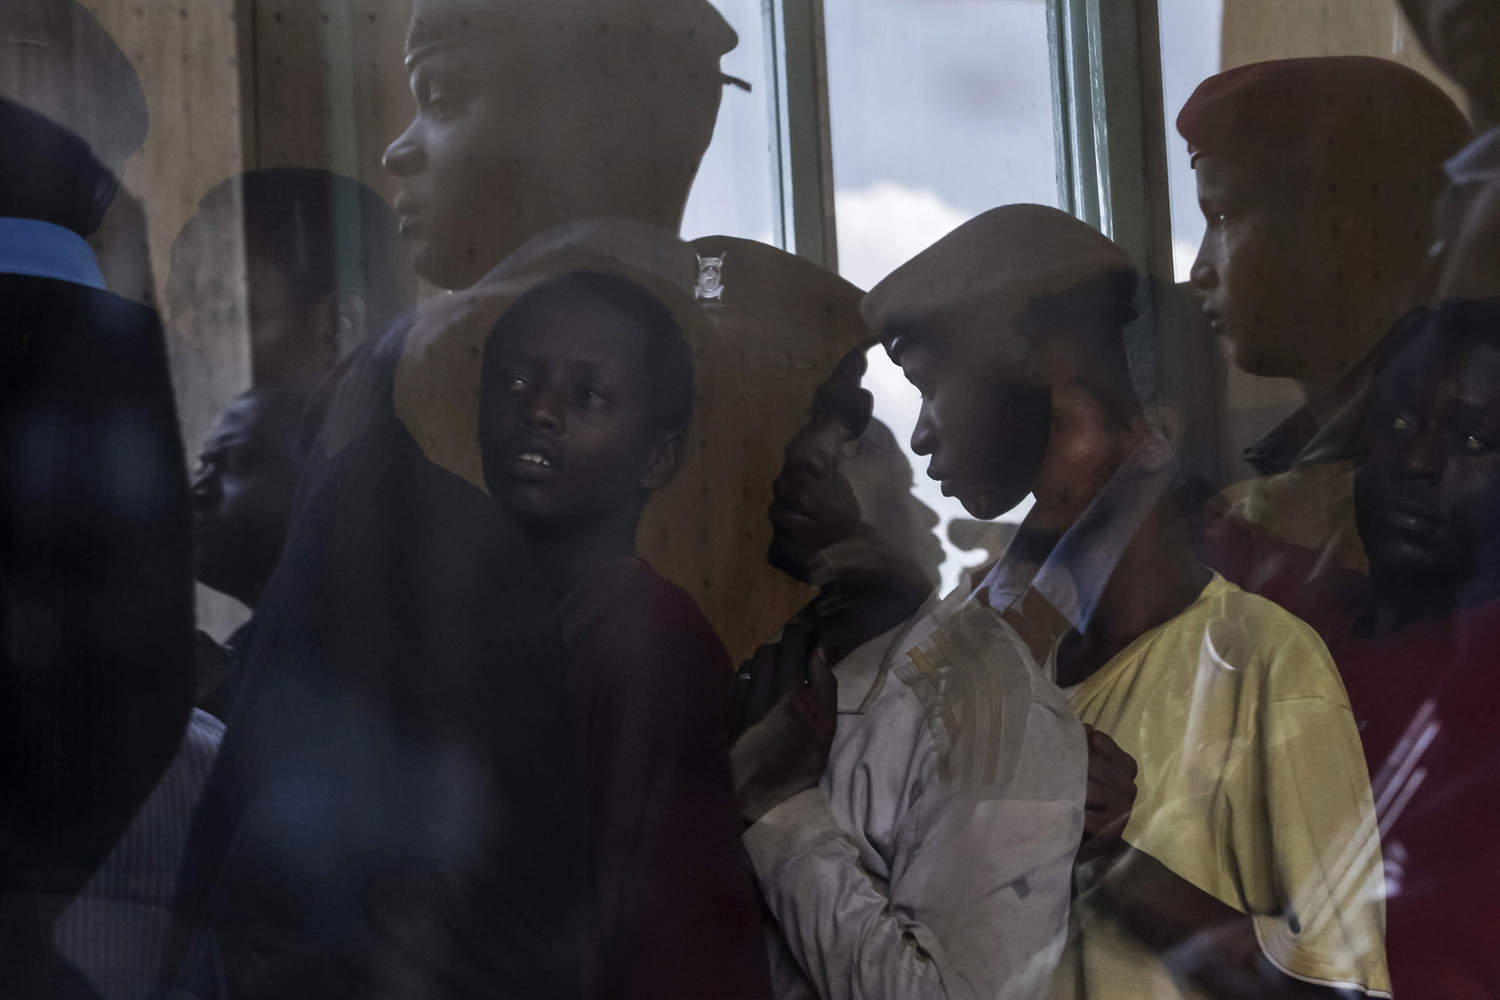 Apr. 9, 2014. Detained Somali men are lined up as police officers are reflected in a window at the Kasarani stadium in Nairobi, Kenya, More than 1,000 Somalis are being held by Kenyan police in a soccer stadium, according to reports. The refugees were arrested in a week-long sweep through Nairobi's Eastleigh neighborhood.